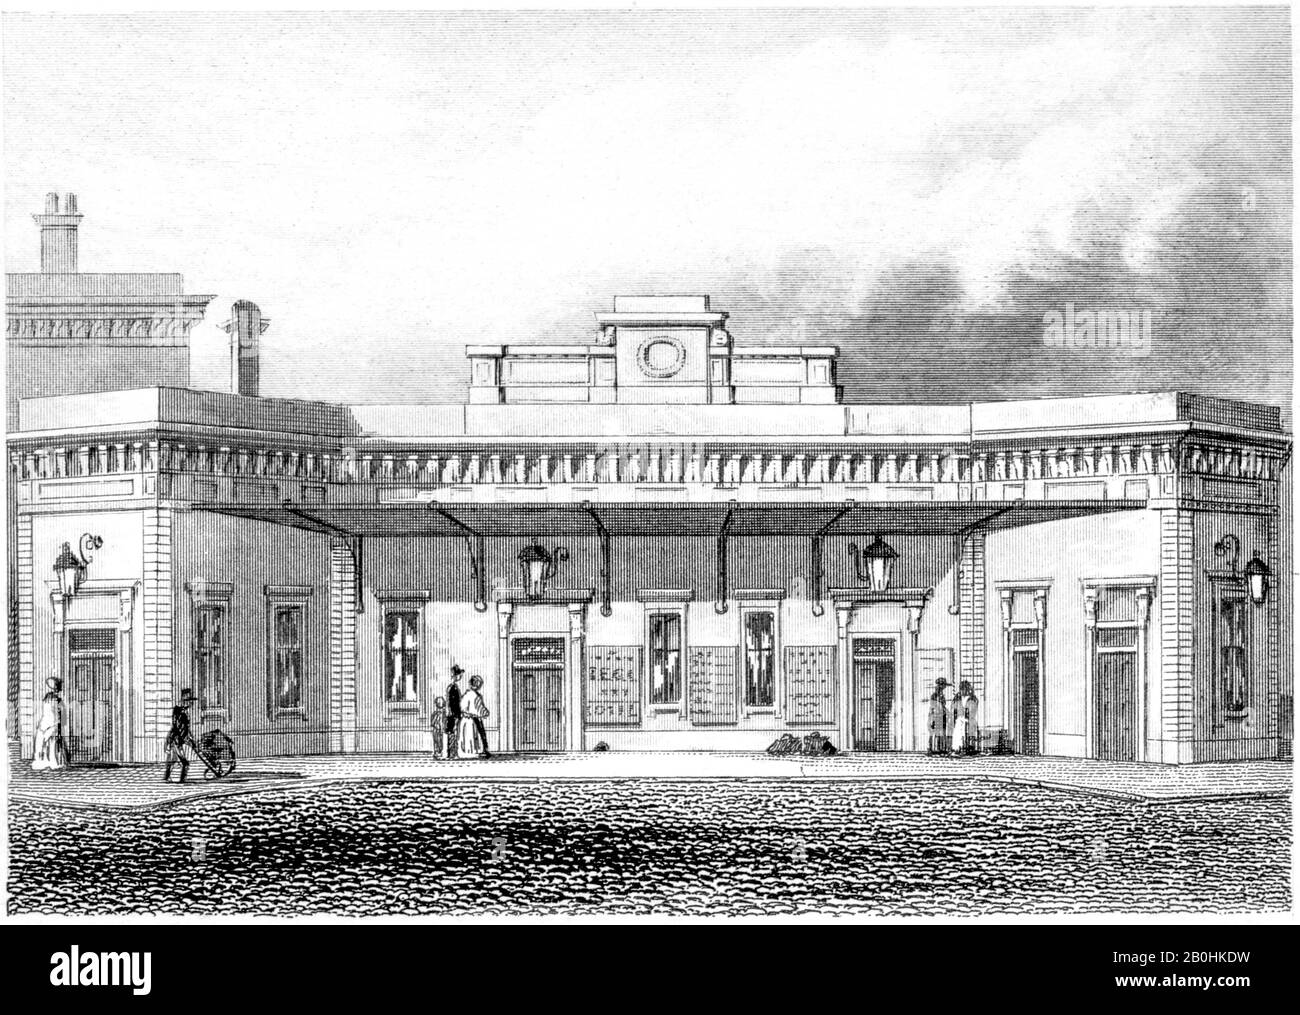 An engraving of the Brighton Railway Station London Bridge scanned at high resolution from a book printed in 1851. Believed copyright free. Stock Photo